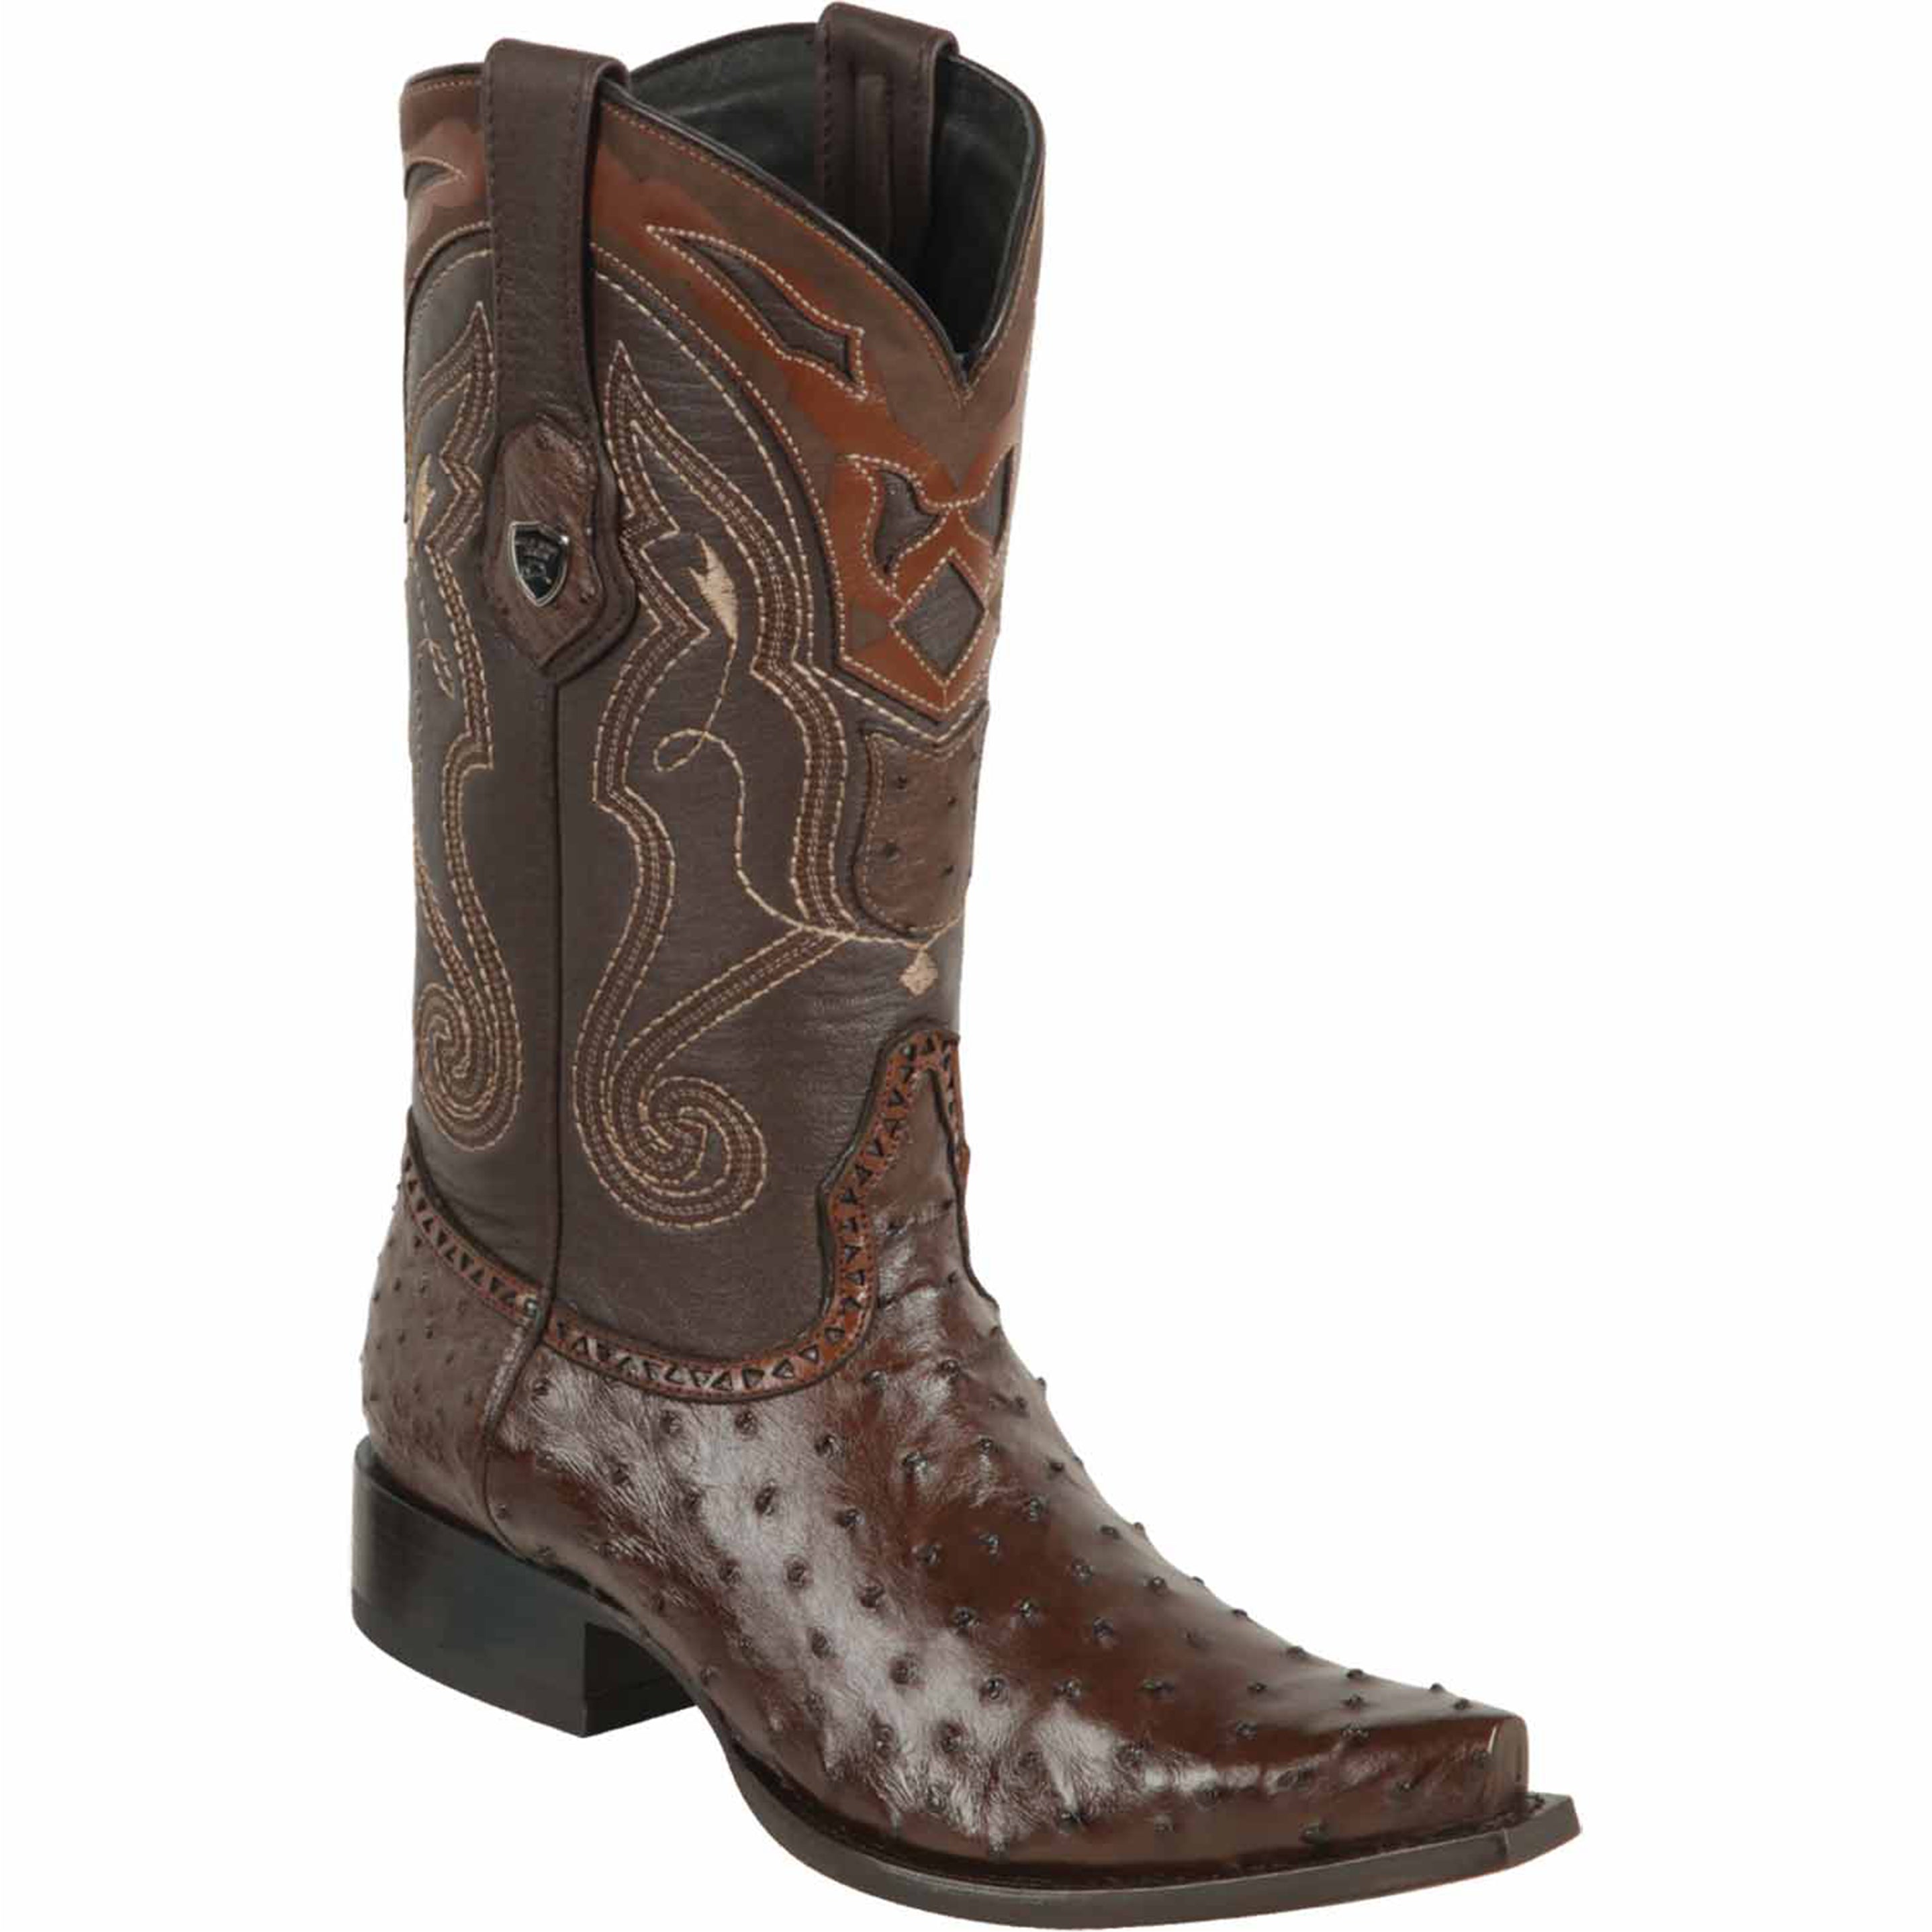 Mens Brown Ostrich Skin Boots Snip Toe - Wild West Boots